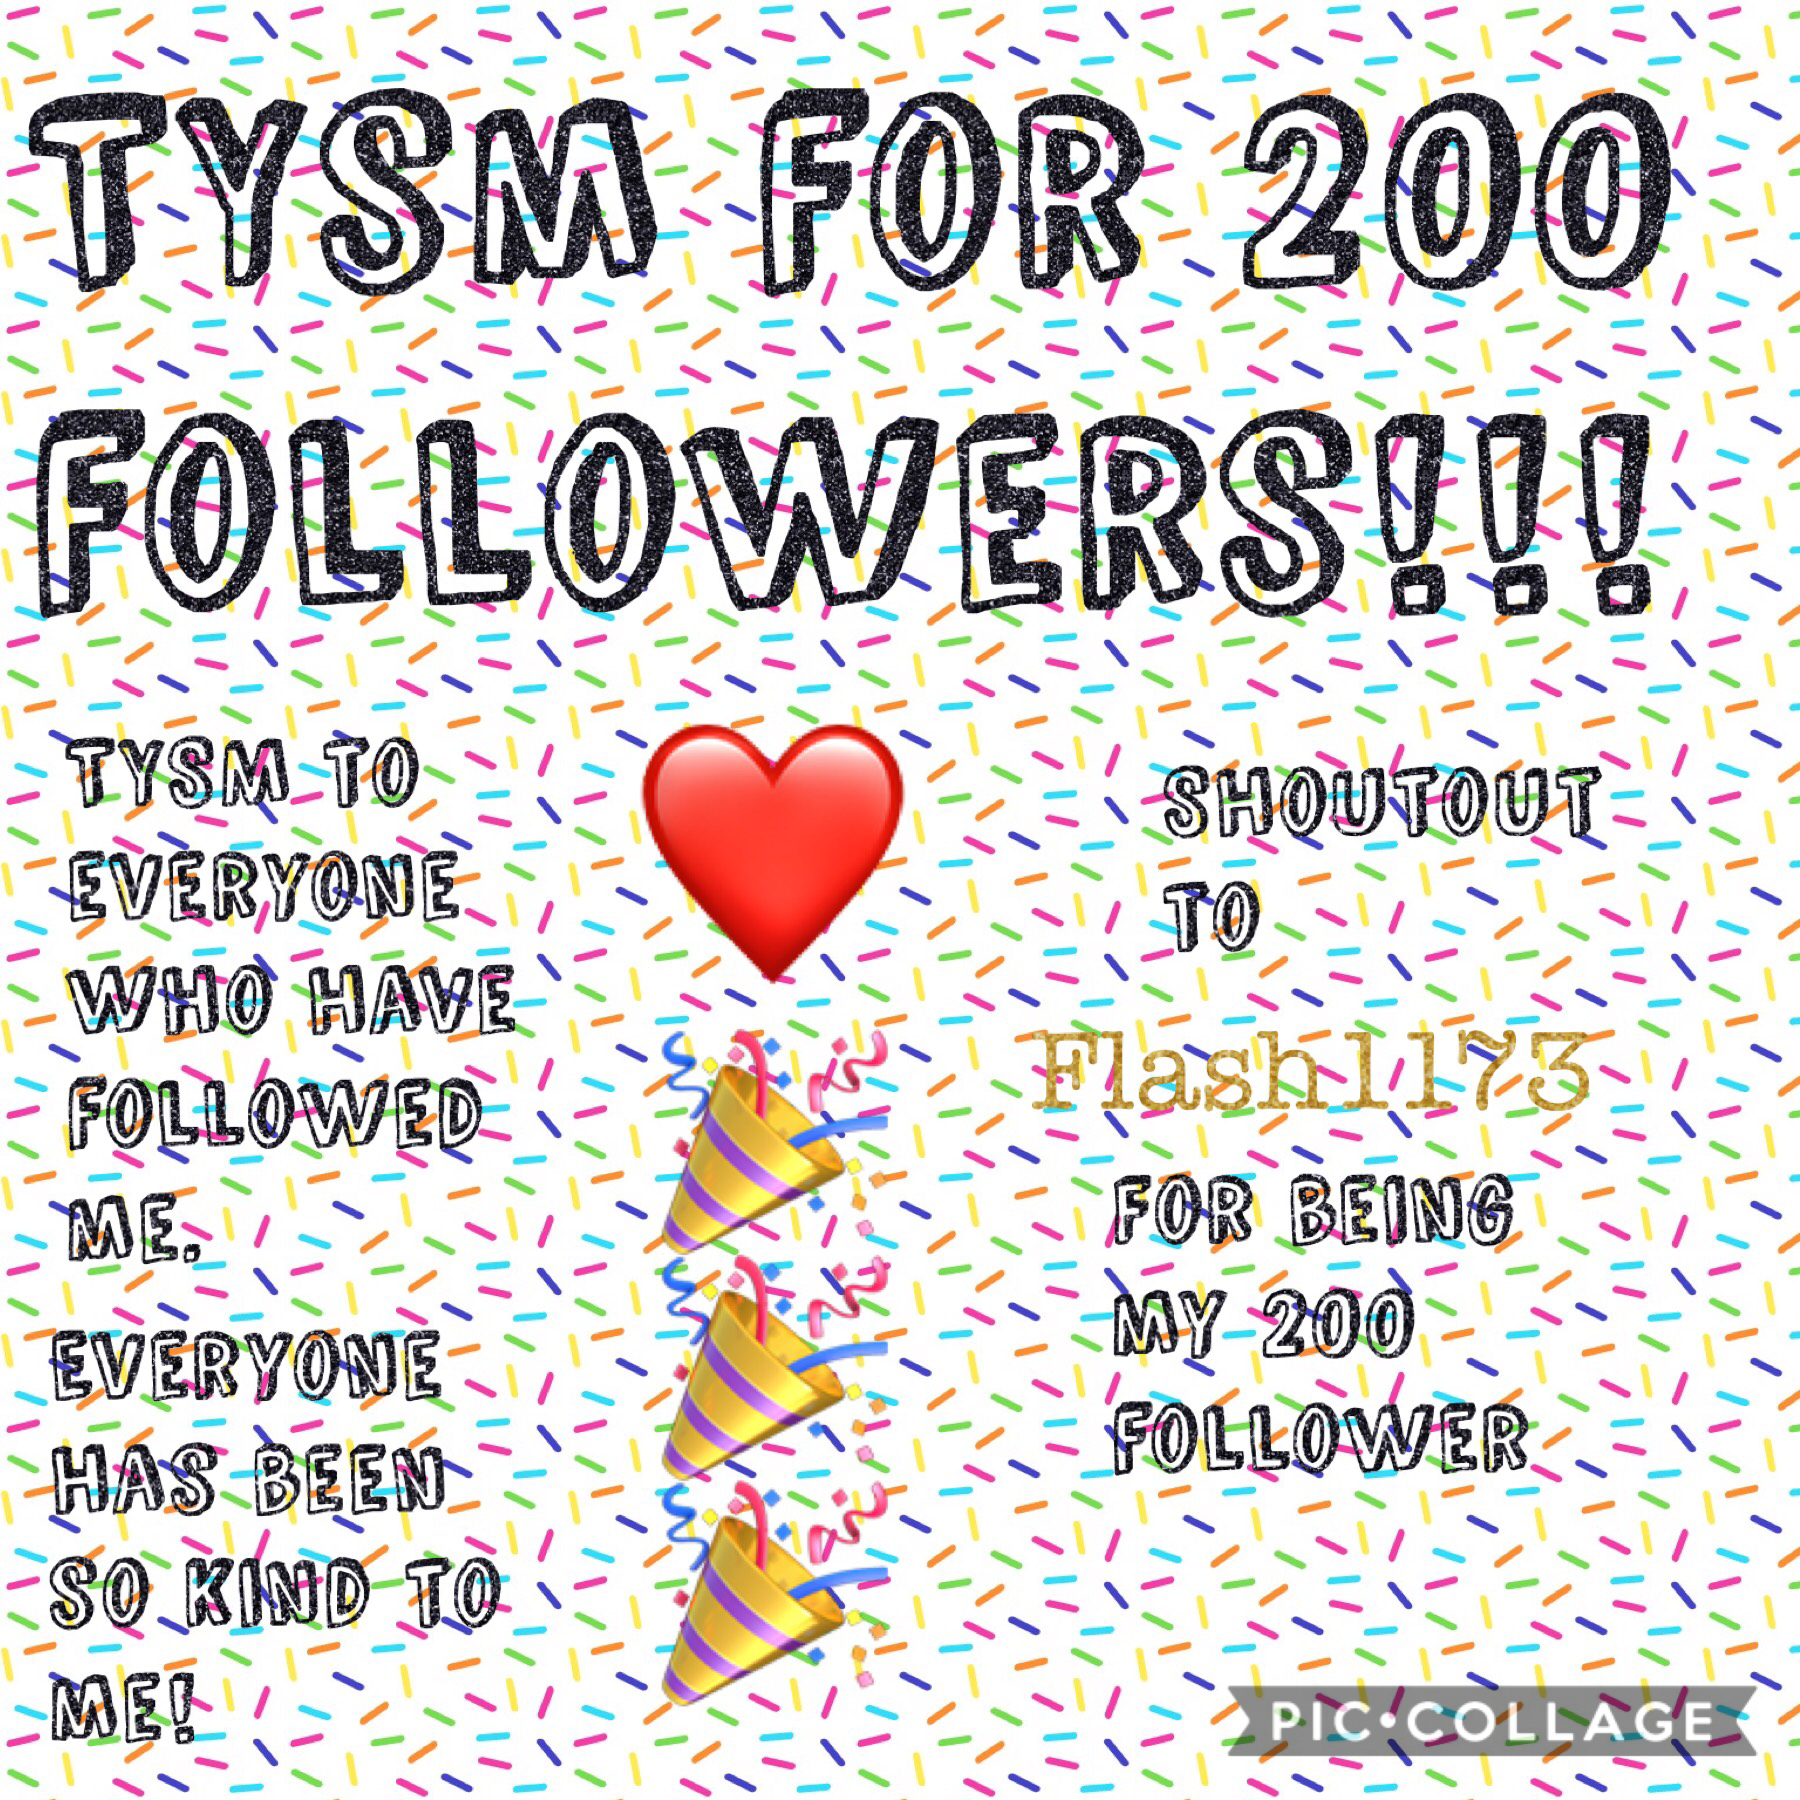 Eek! TYSM guys.i was just down my homework and looked on my phone and I hit 200 followers. For some people it may not seem like a lot but I'm very proud of it ❣️ much of love ChocolateLover01 🍫💝